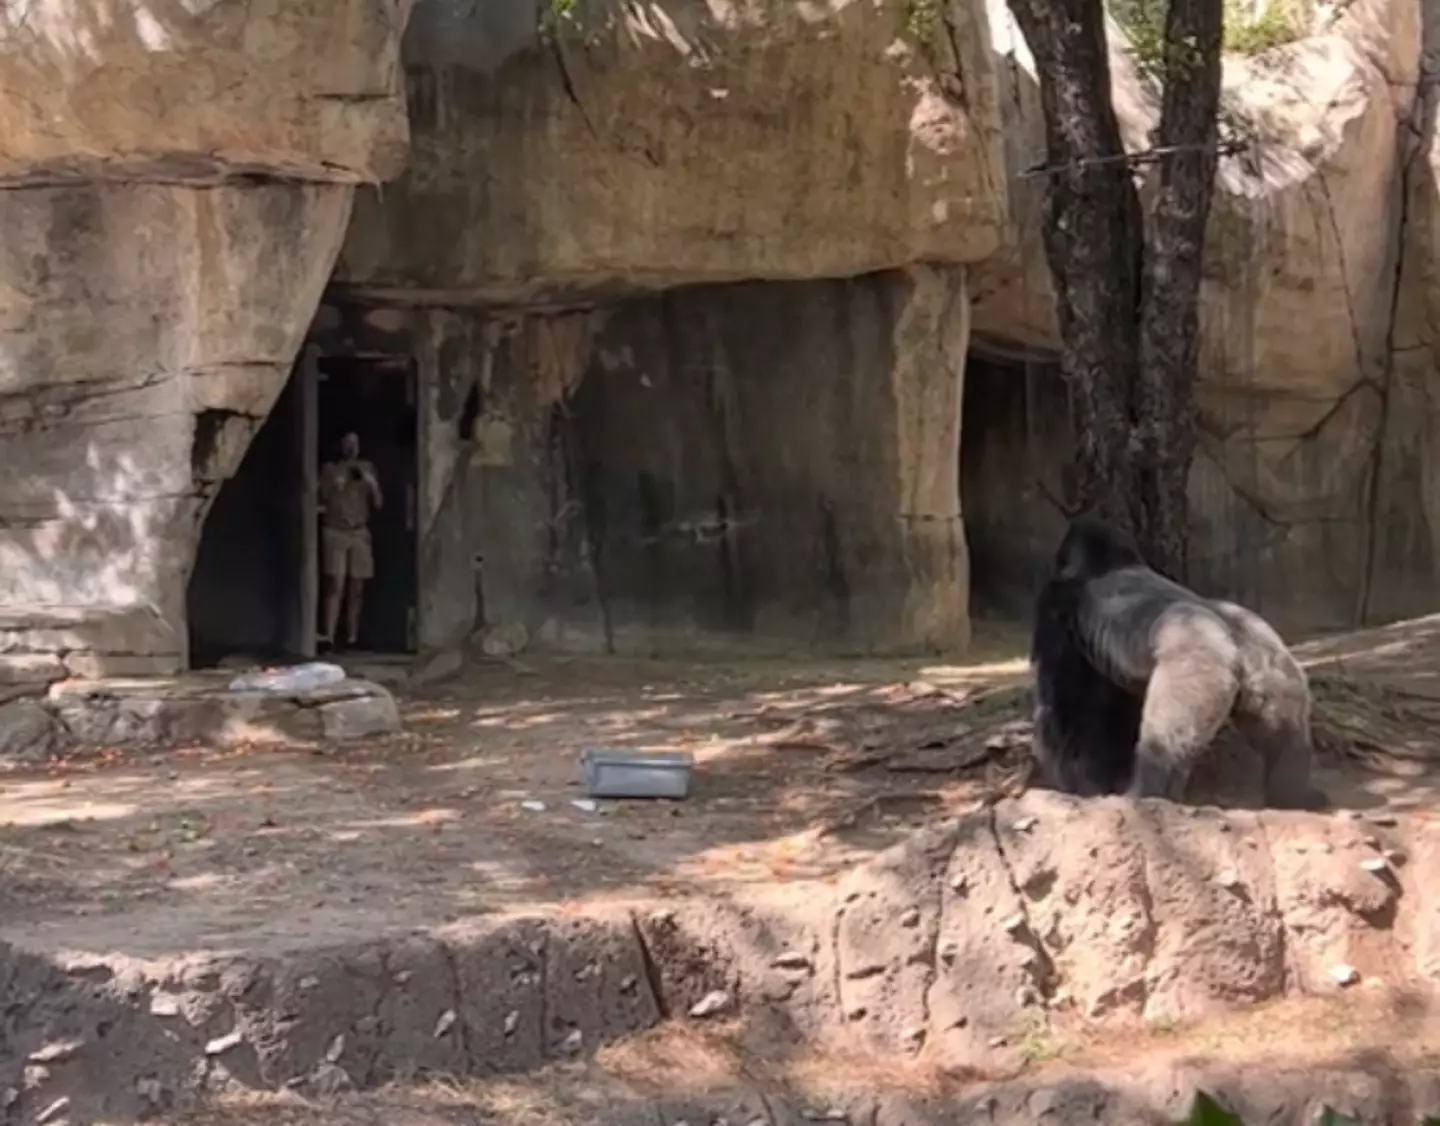 The zookeepers were trapped inside with a gorilla named Elmo.